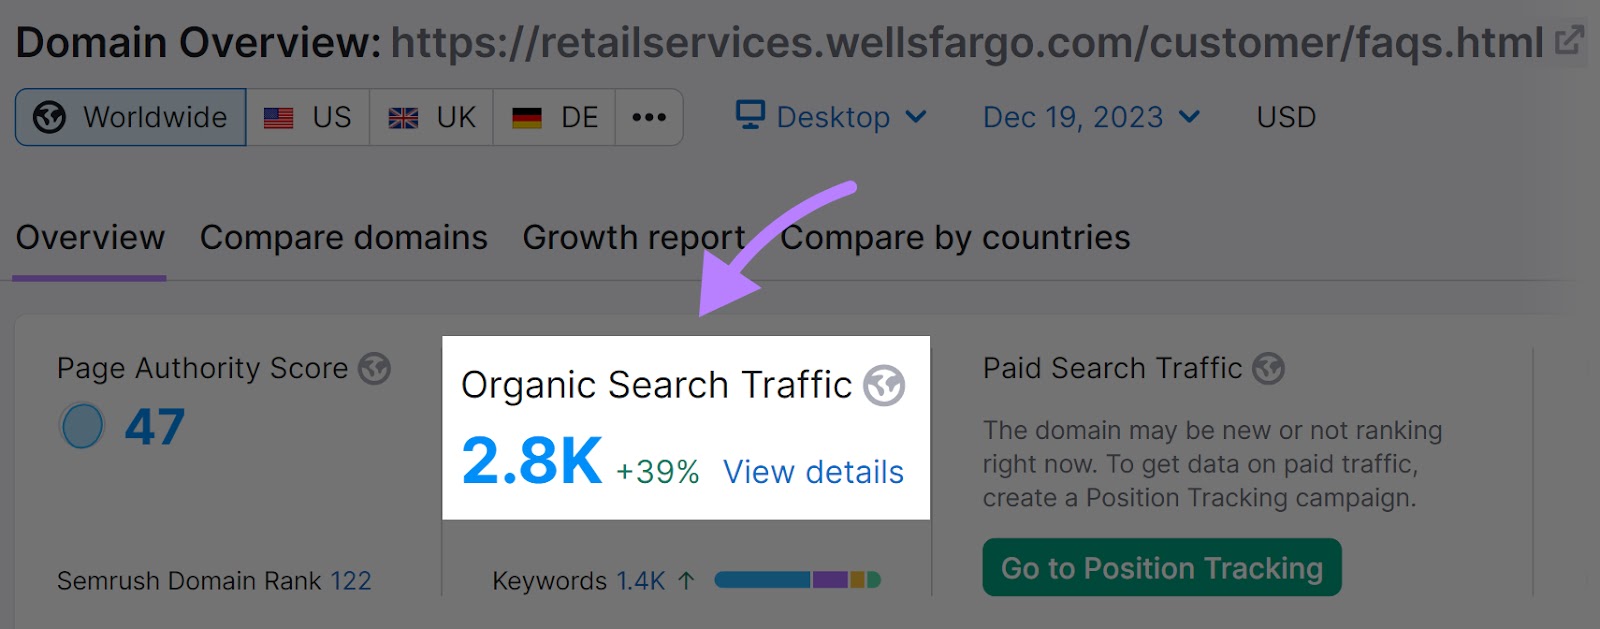 Wells Fargo’s FAQ page shows 2.8k monthly visitors in Domain Overview tool